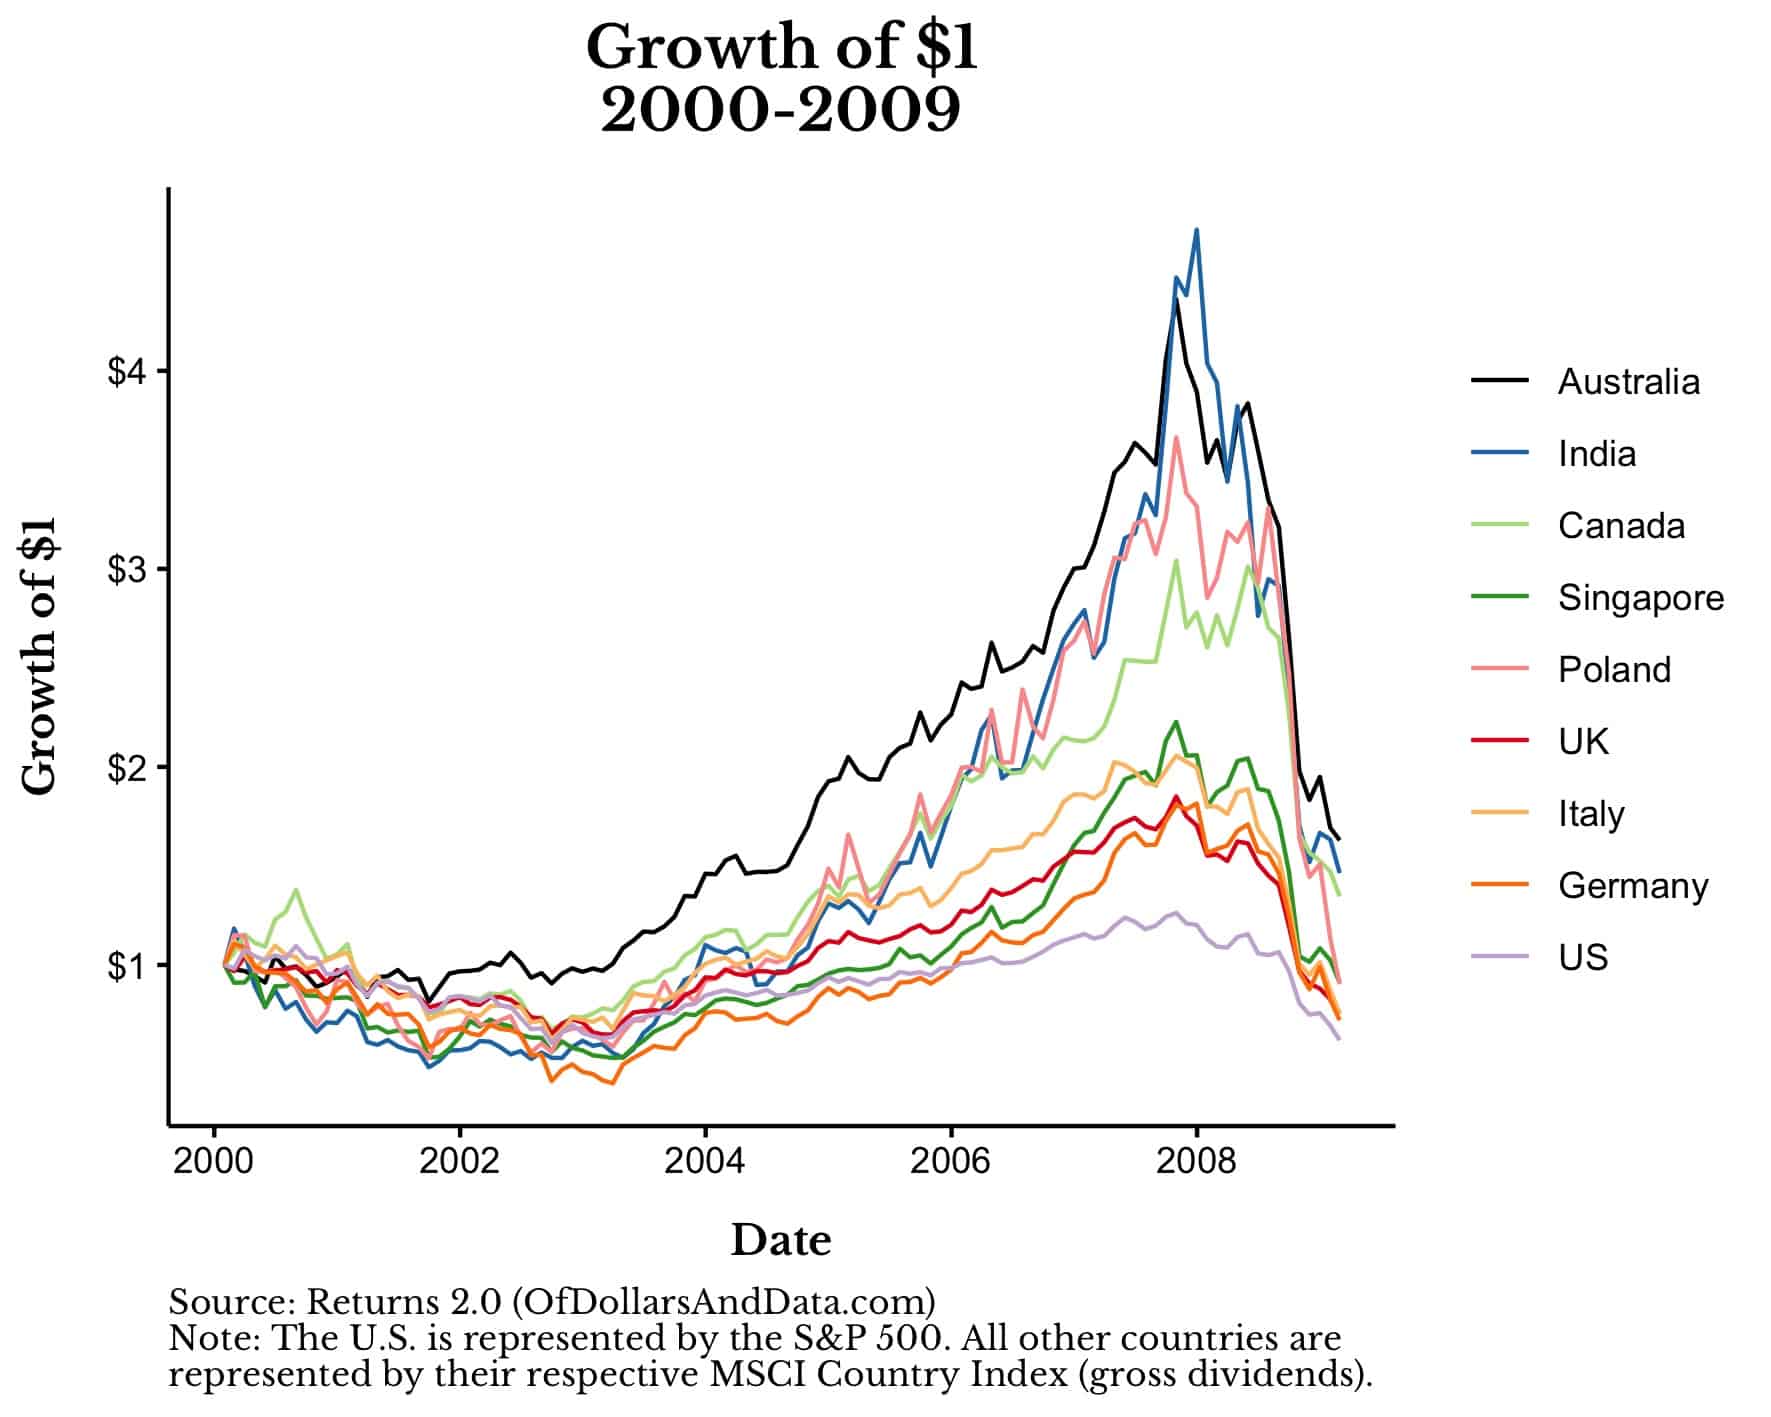 Growth of $1 in various stocks markets around the world from 2000-2009.